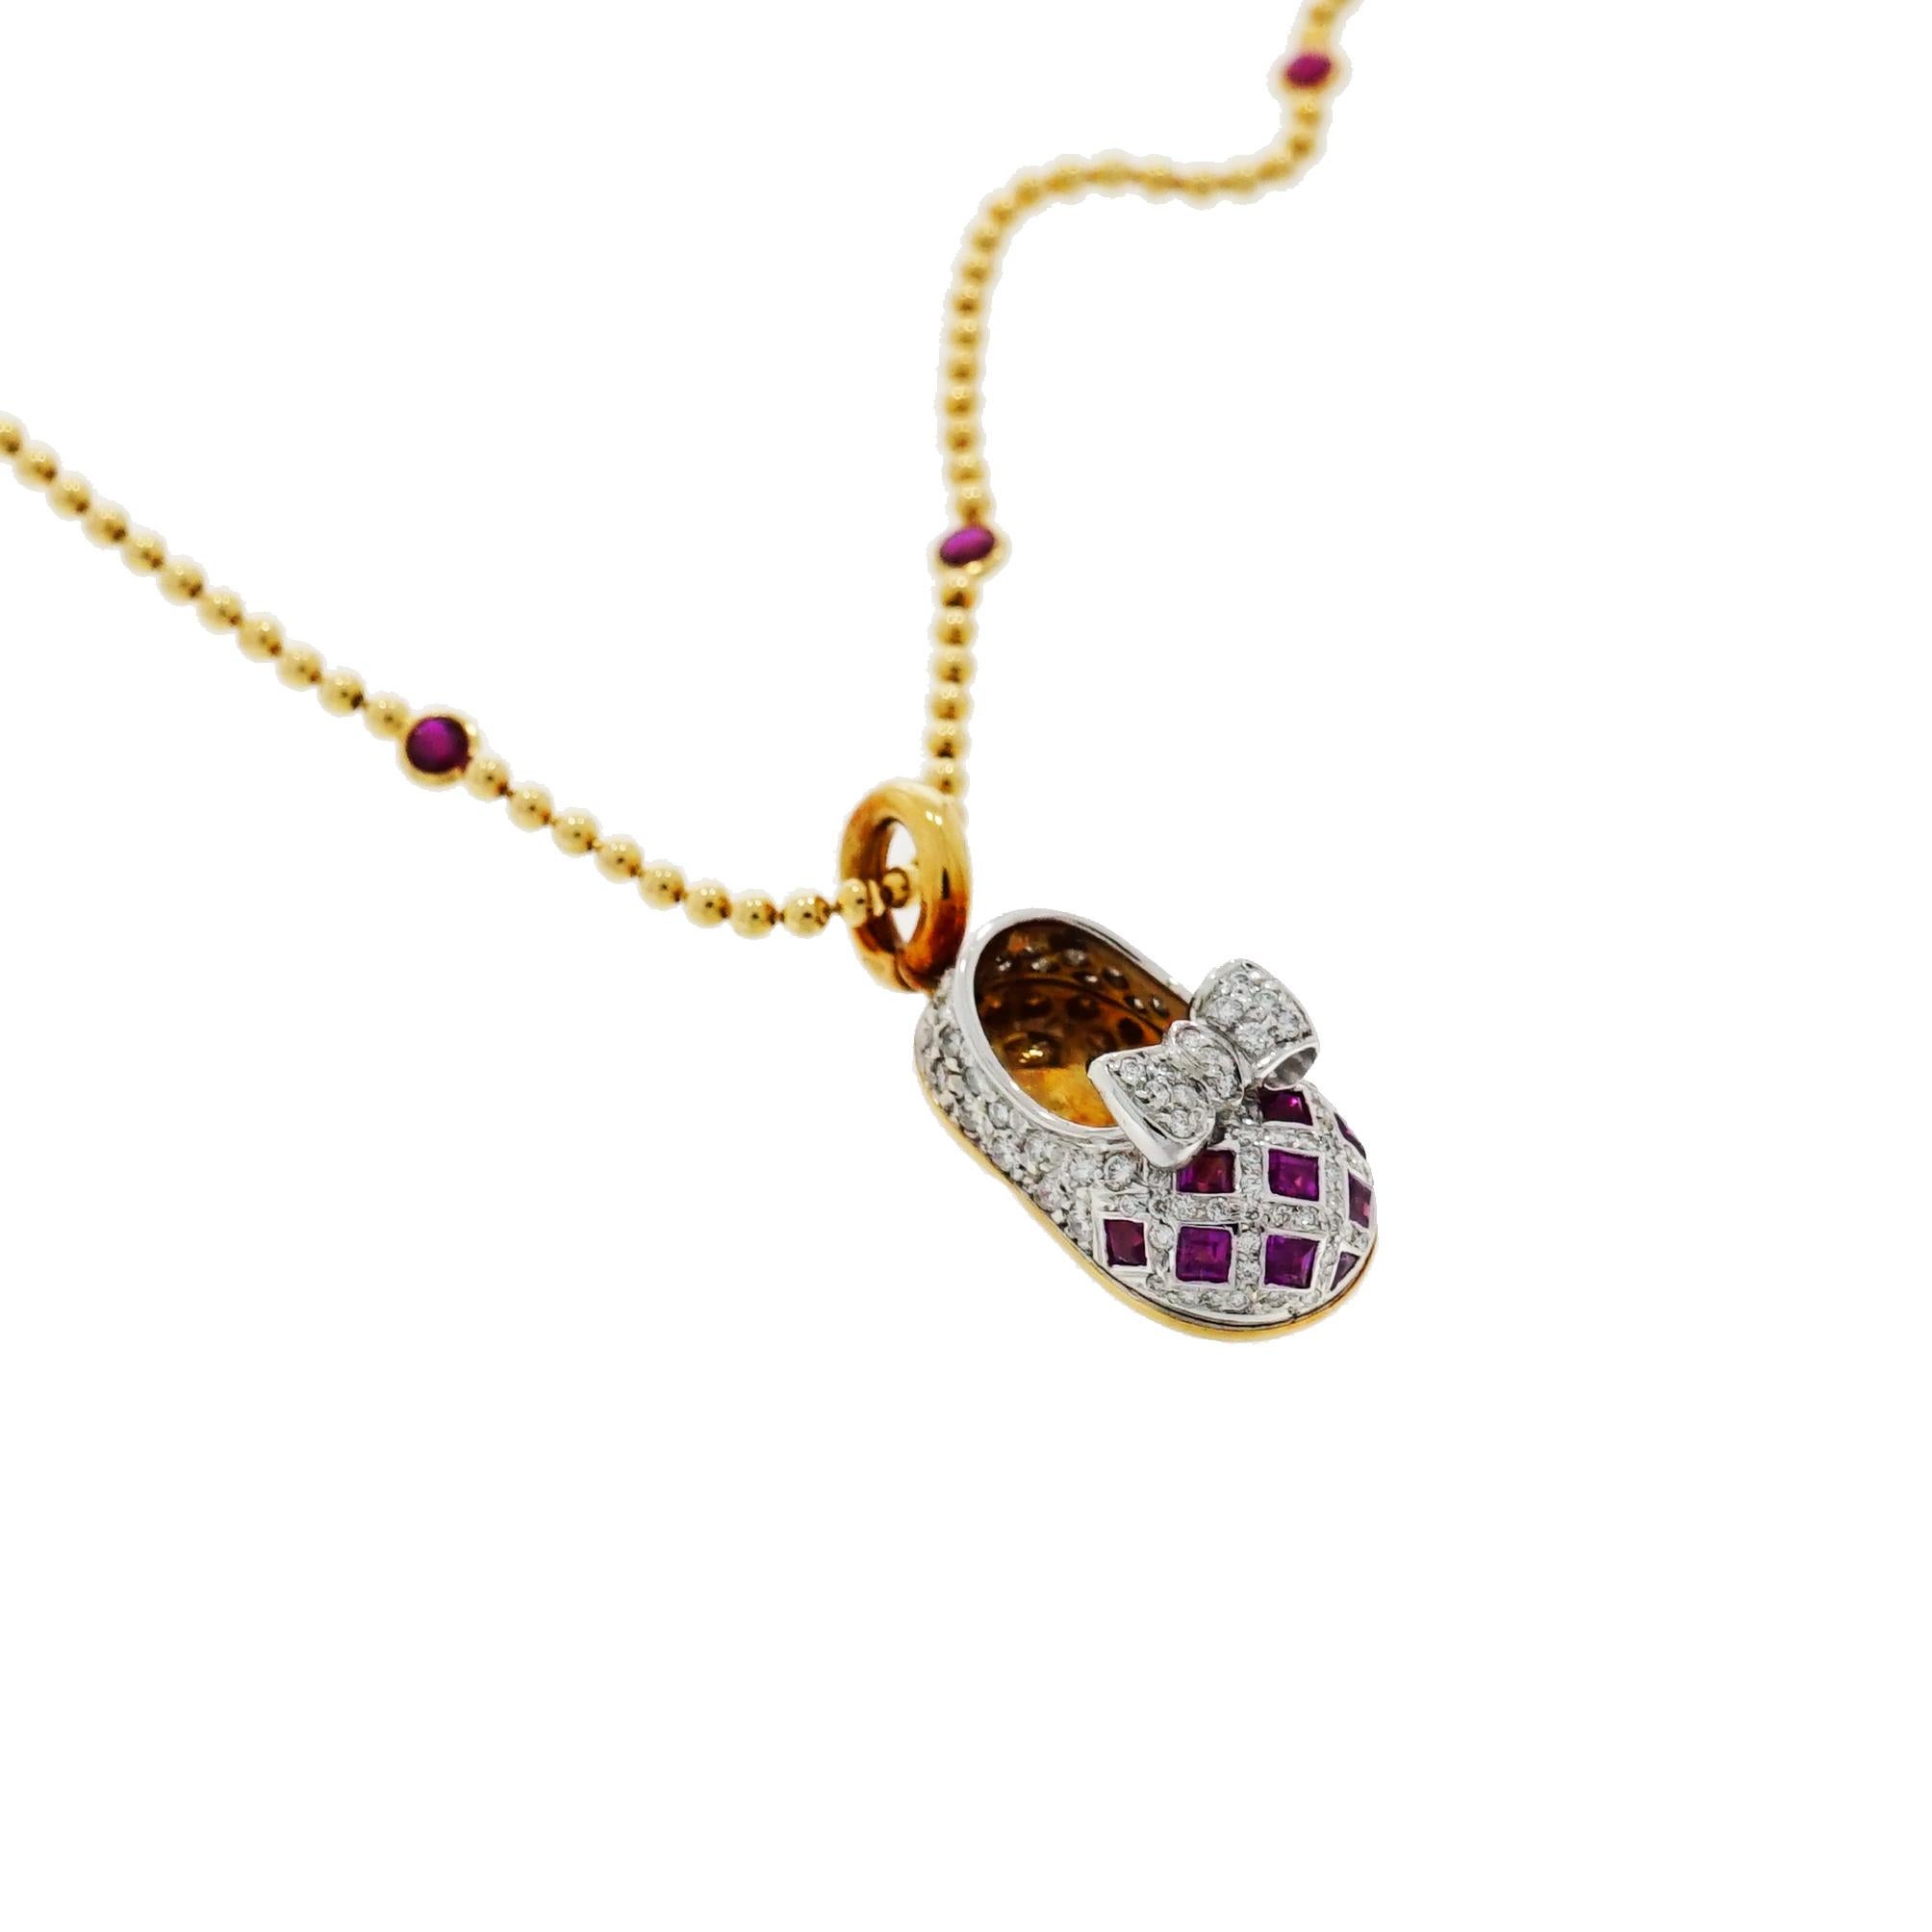 The Aaron Basha baby shoe charms are synonymous with quality, fashion and playful. 
This Baby Shoe is bejeweled with Rubies and Diamonds, crafted in 18k Yellow Gold.
Complemented by an 18k Yellow Gold Beaded chain with 7 bezel set round Rubies.
The